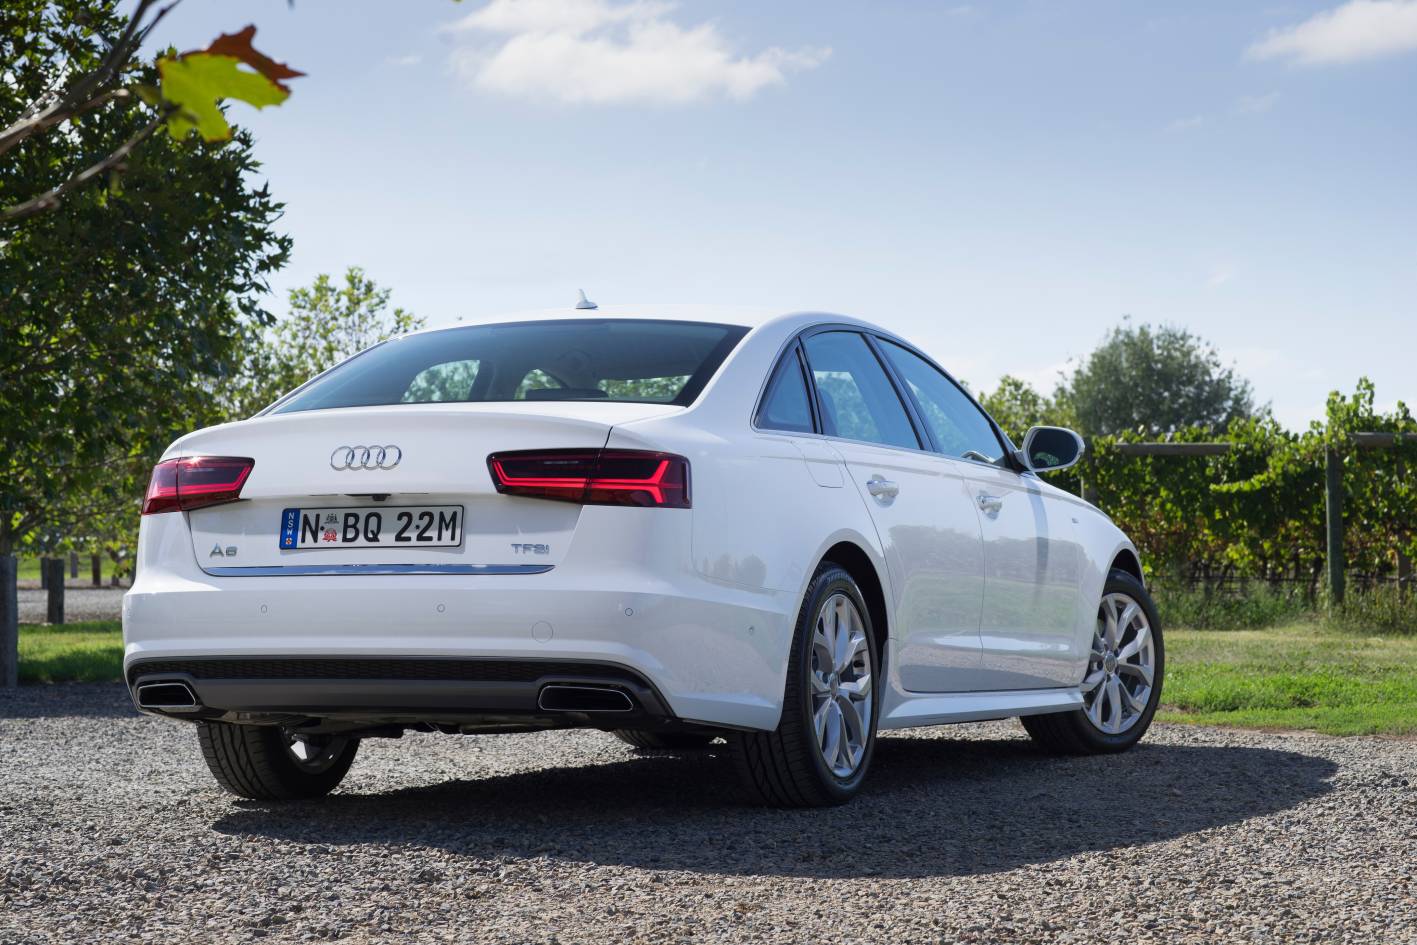 Refreshed 2015 Audi A6 and S6 land in Australia - ForceGT.com